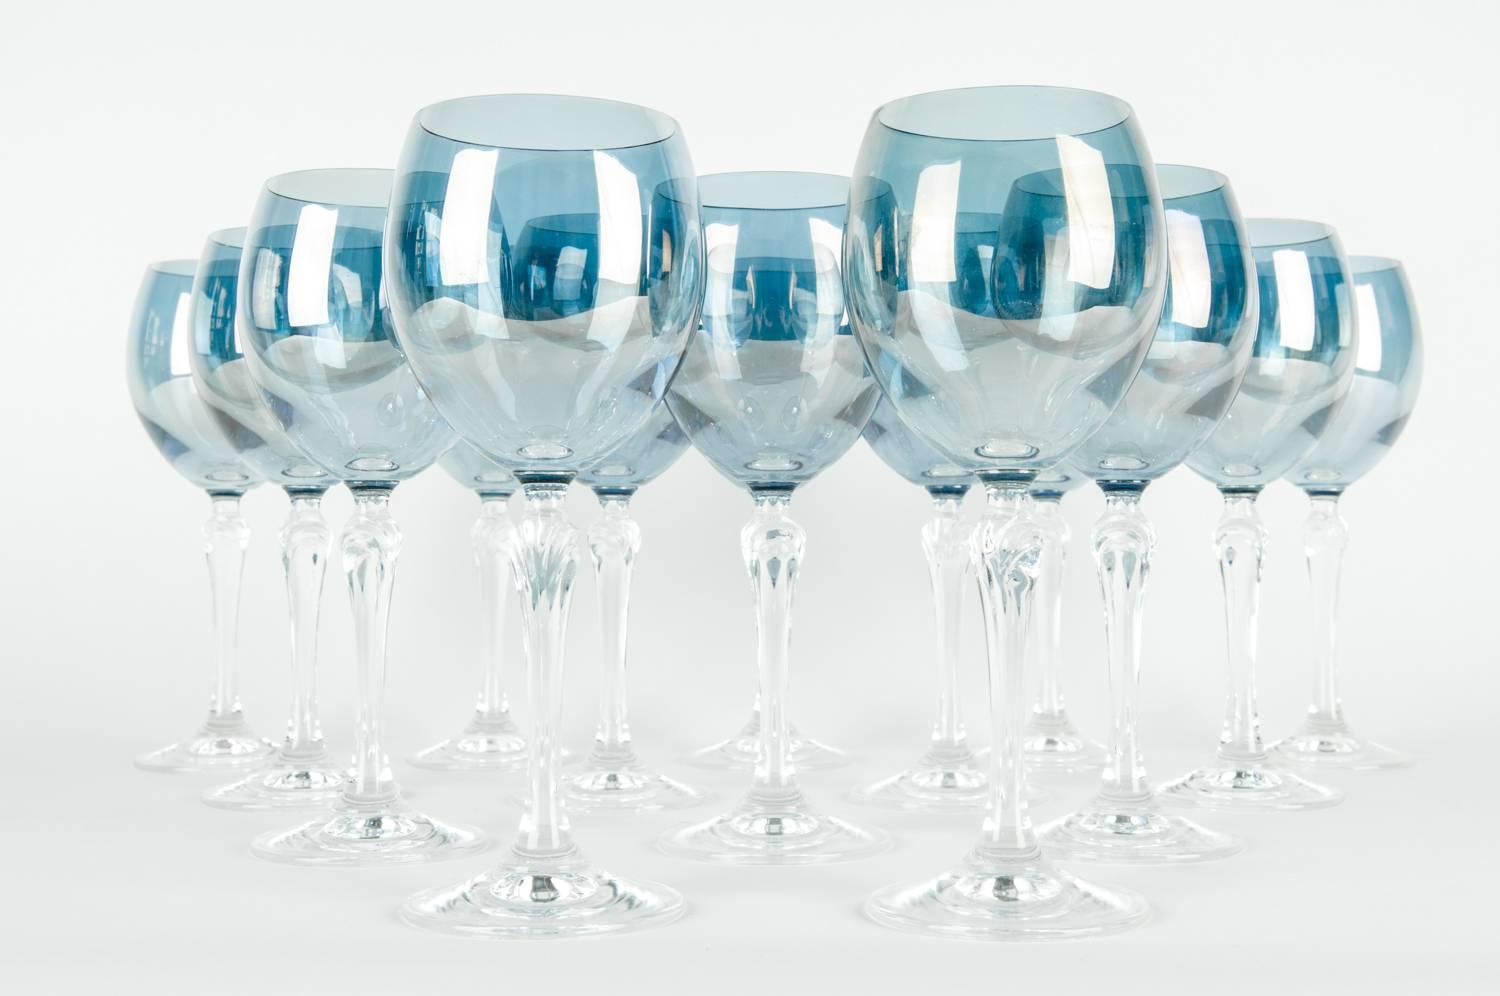 Late 20th century iridescent blue crystal wine / water glassware set of 12 pieces. Each glass is in excellent condition, each one measure about 8 inches high X 2.5 inches bottom diameter.